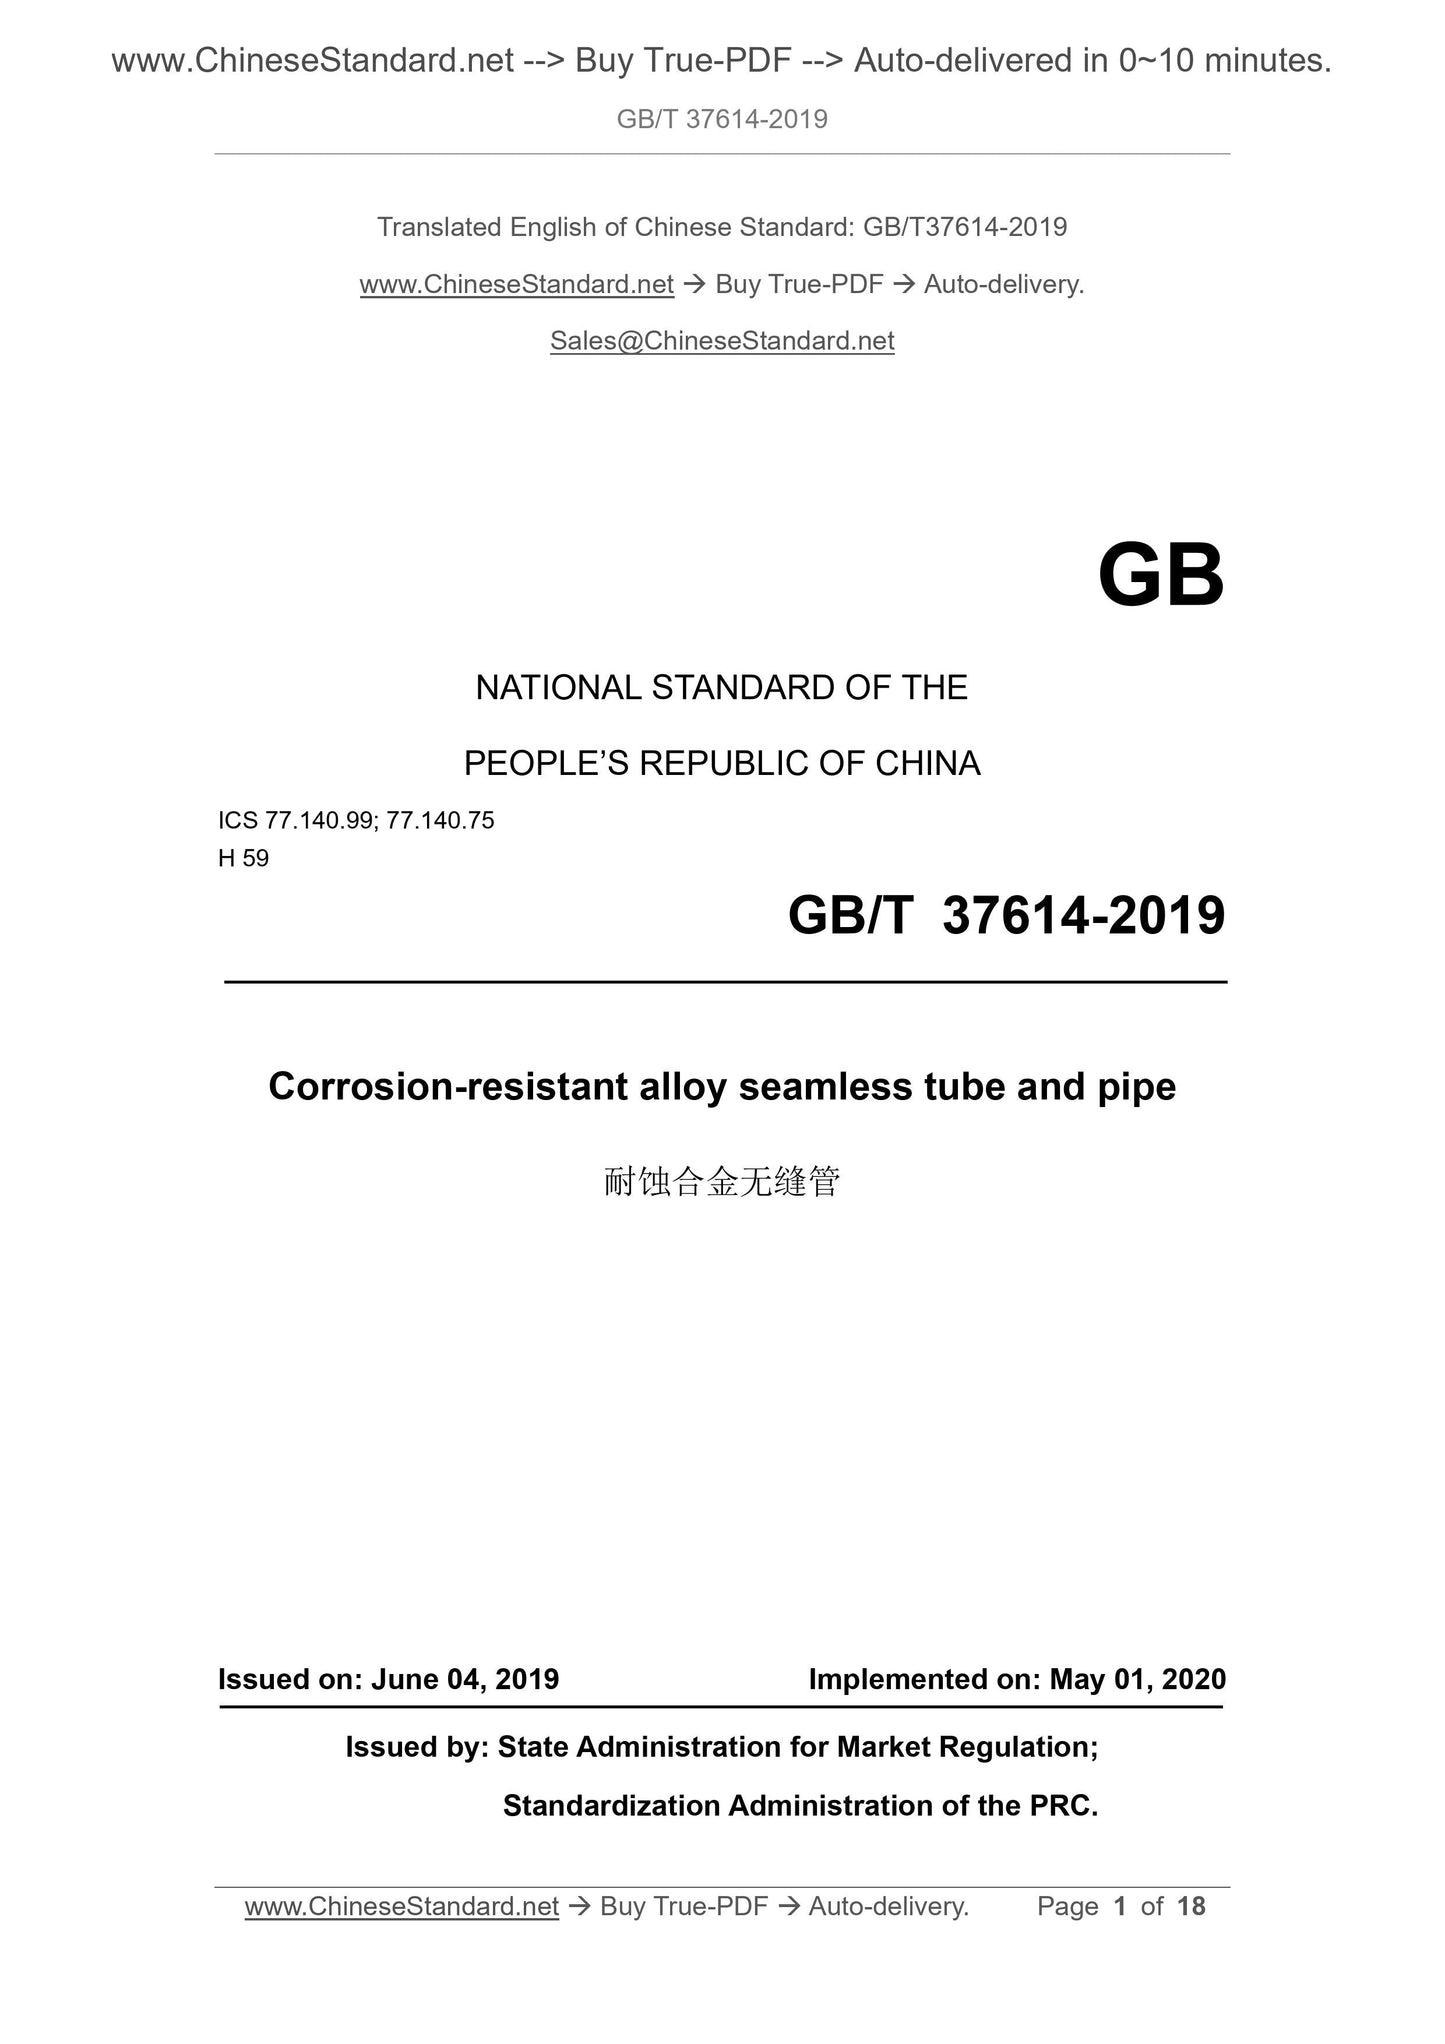 GB/T 37614-2019 Page 1